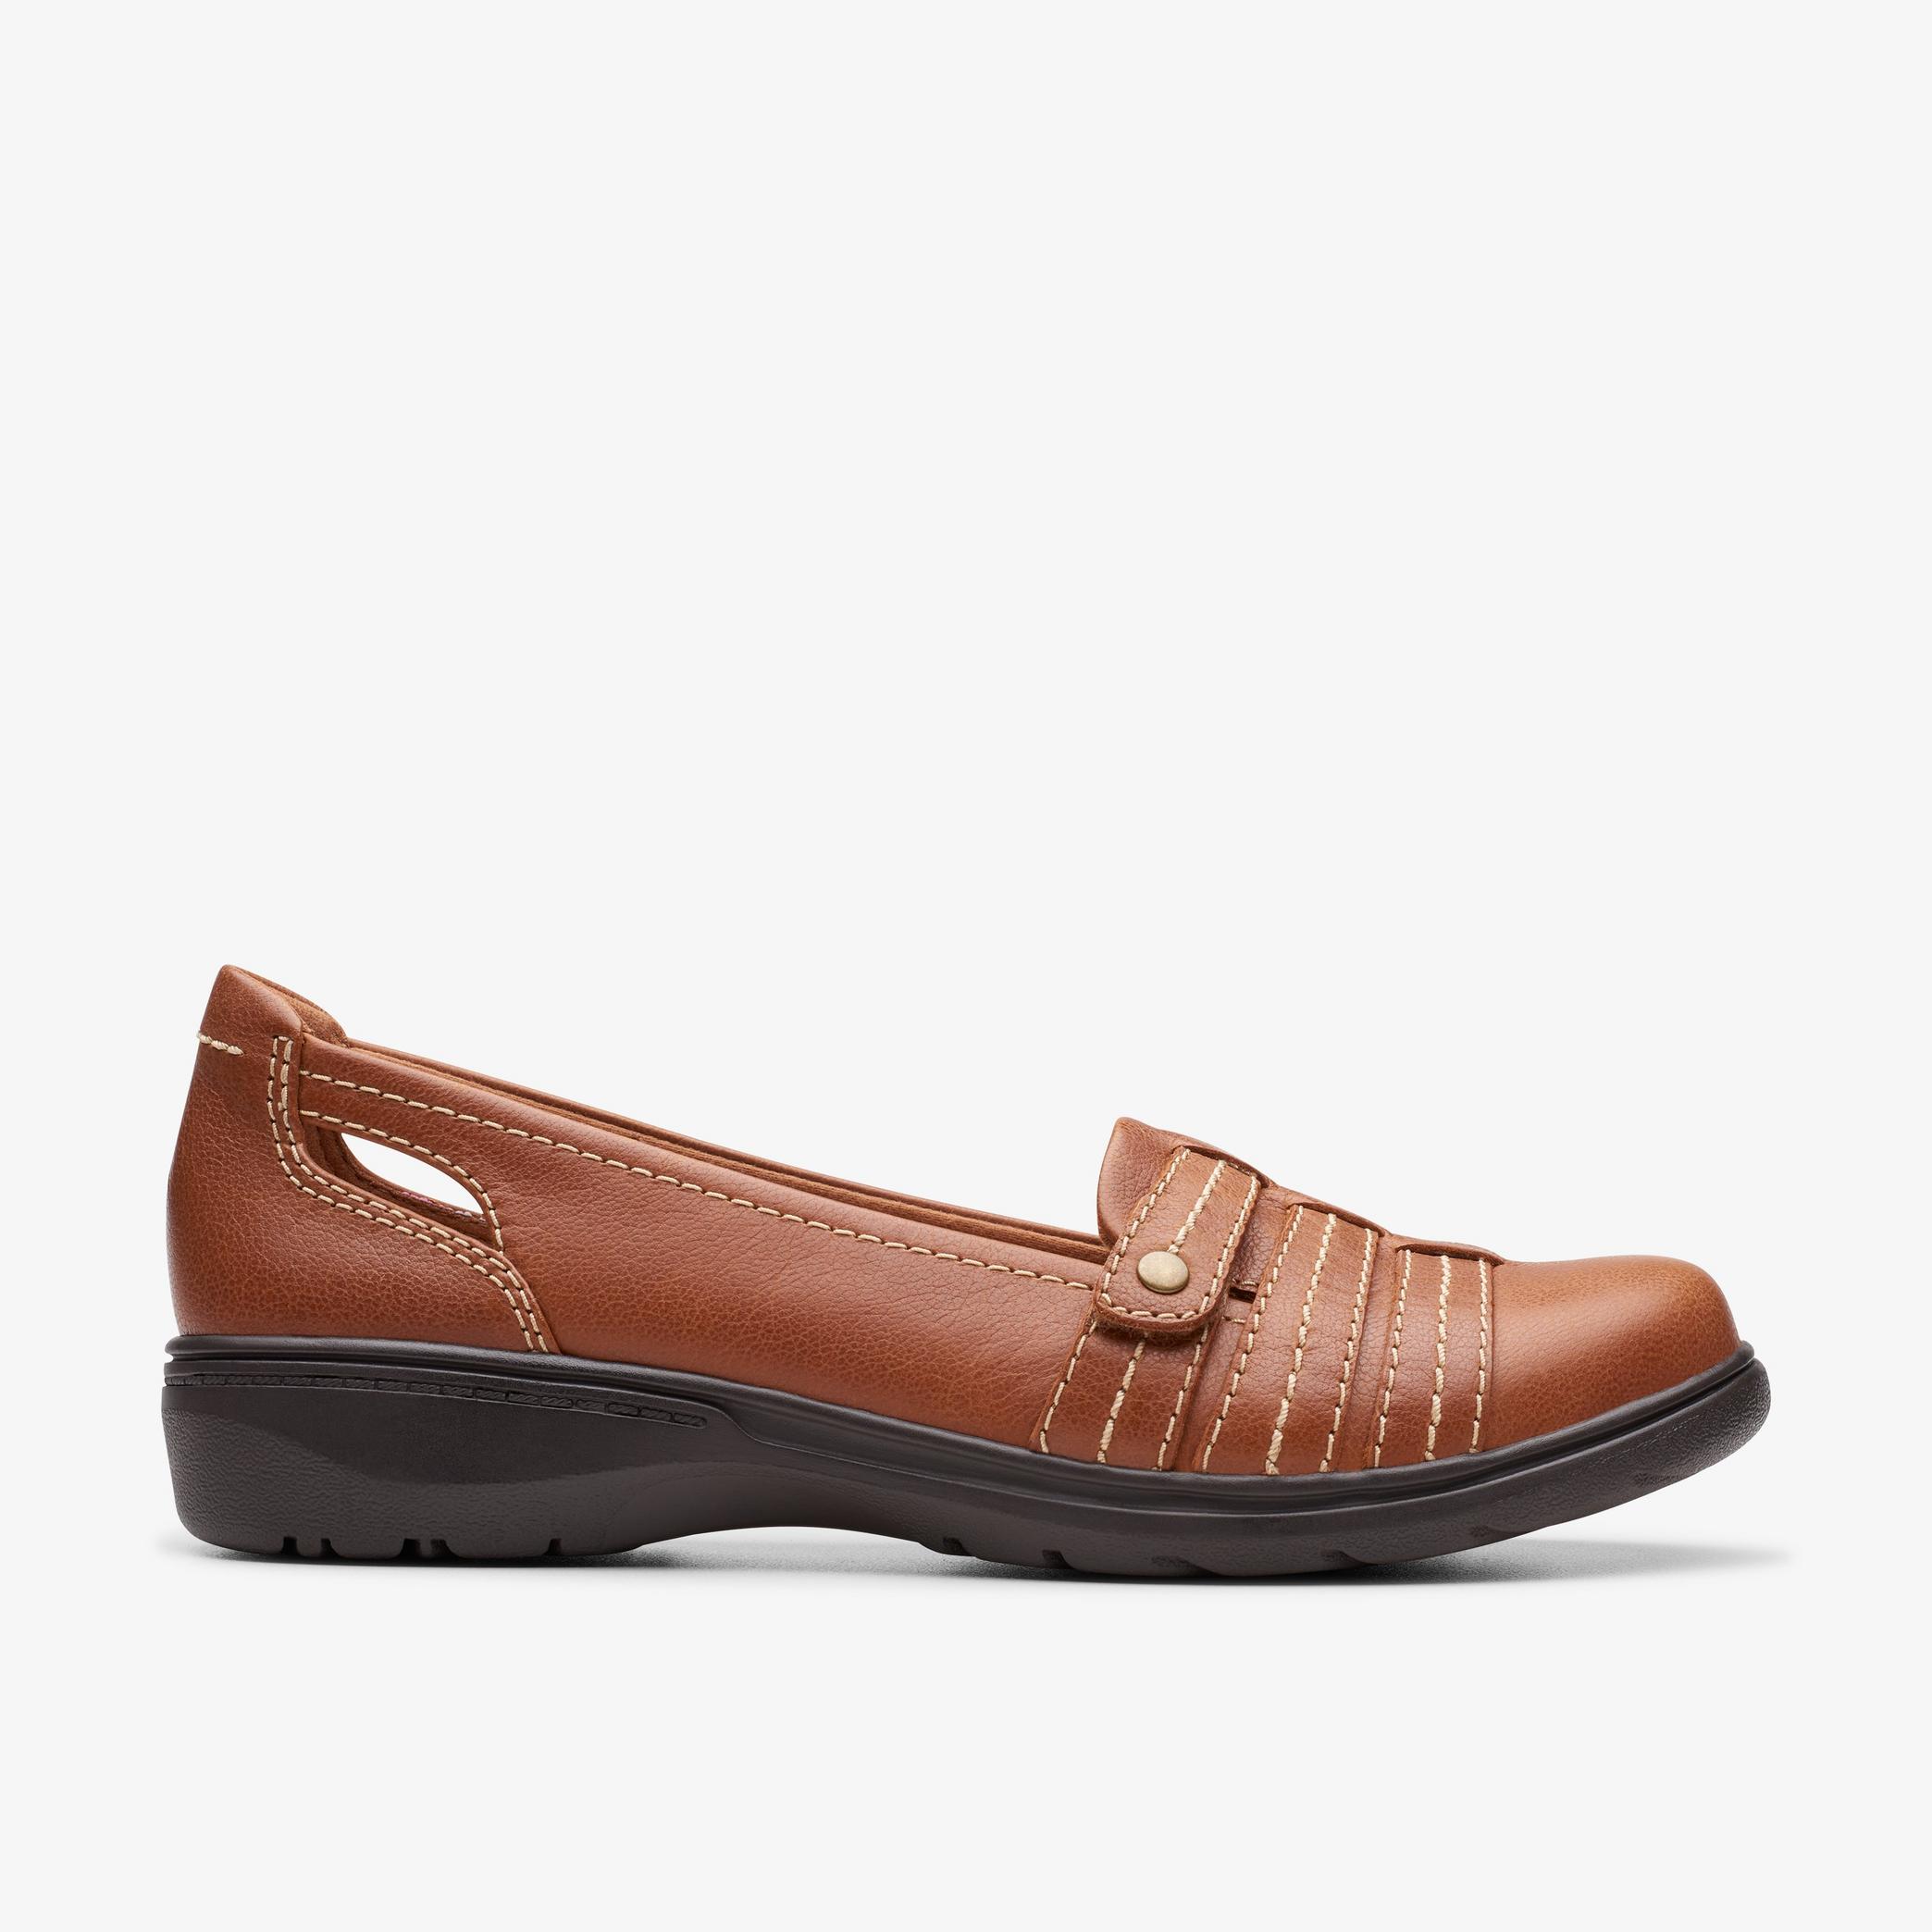 Carleigh Eliza Tan Leather Slip Ons, view 1 of 6